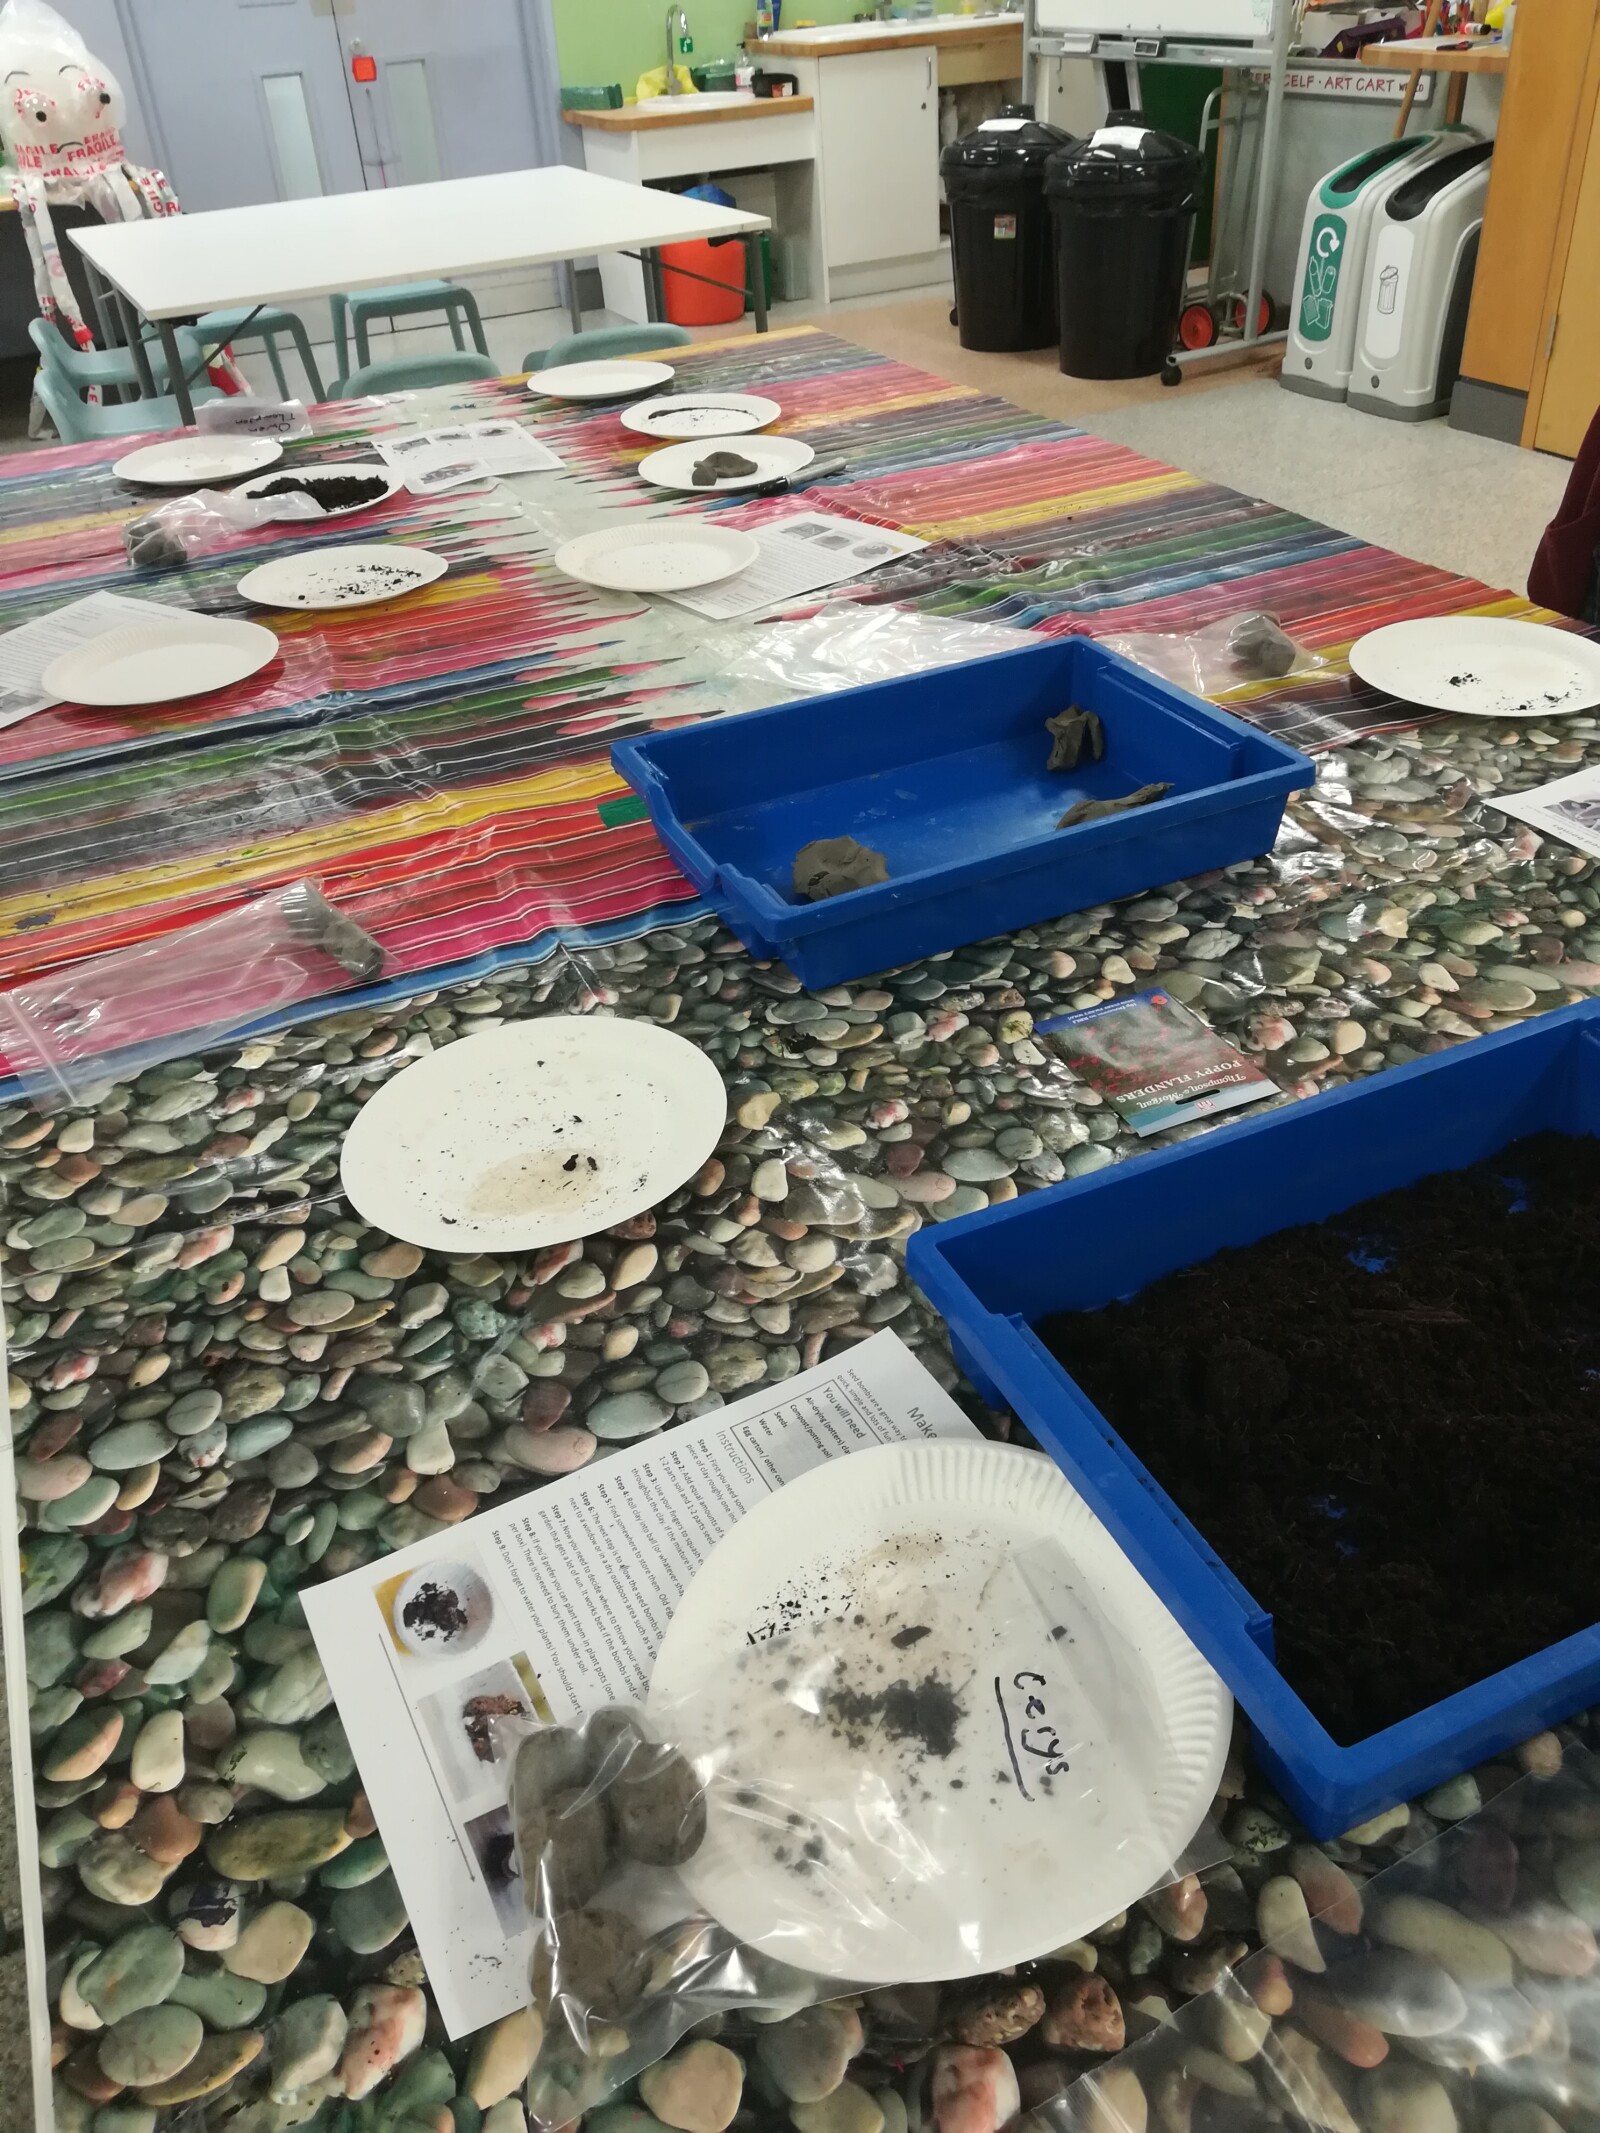 Photograph of tabletop with containers of clay and soil, where visitors were making seed bombs